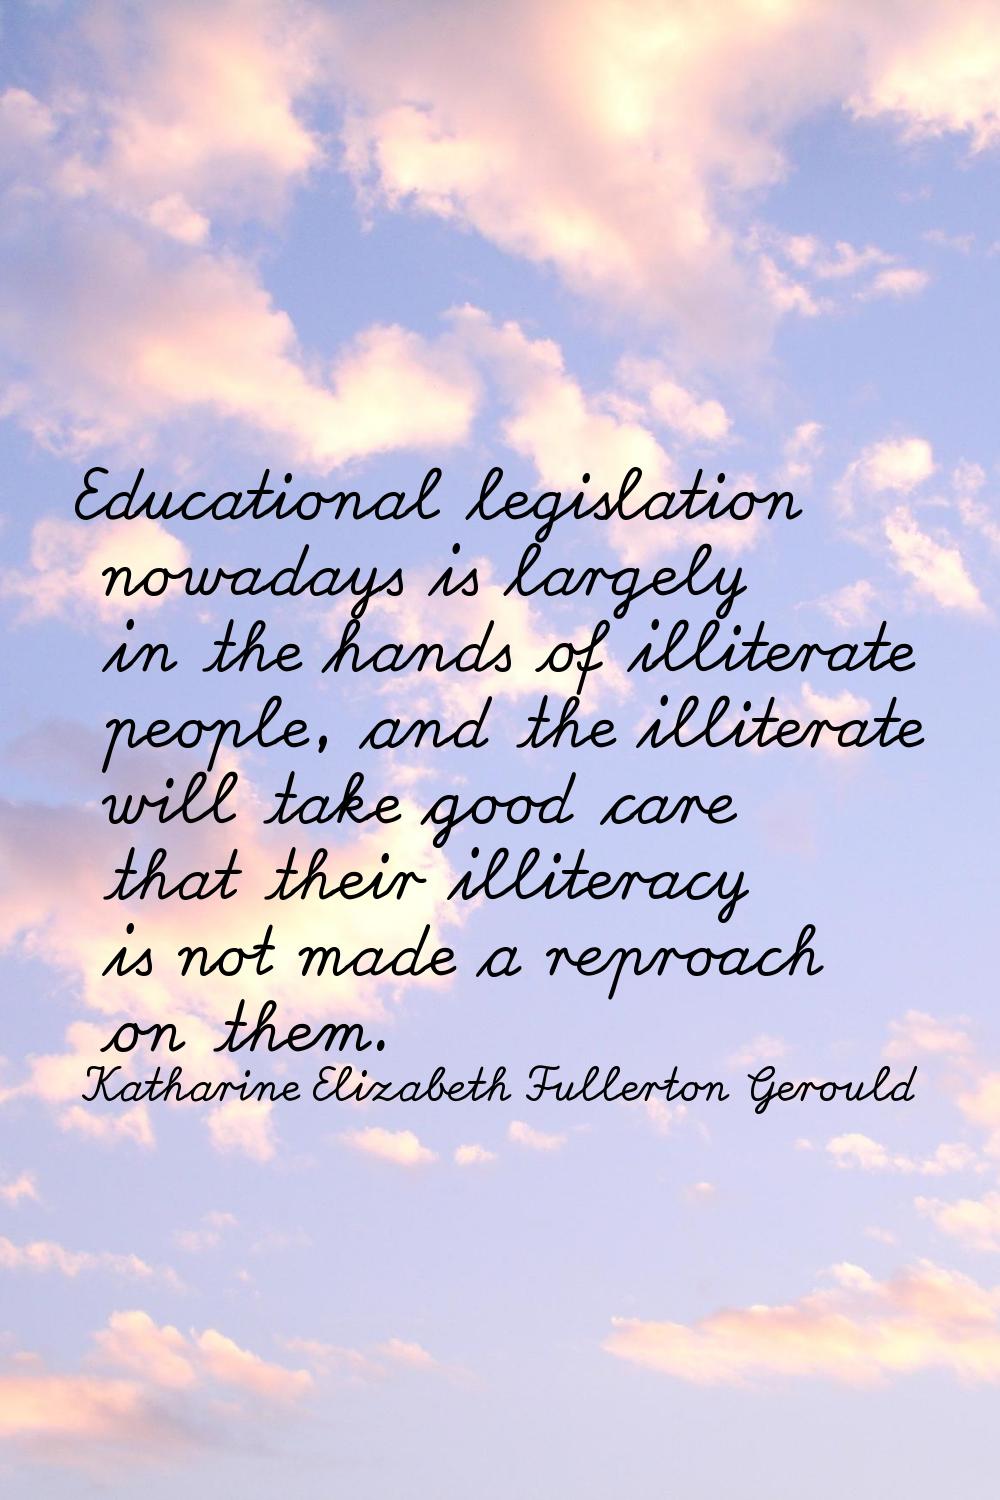 Educational legislation nowadays is largely in the hands of illiterate people, and the illiterate w